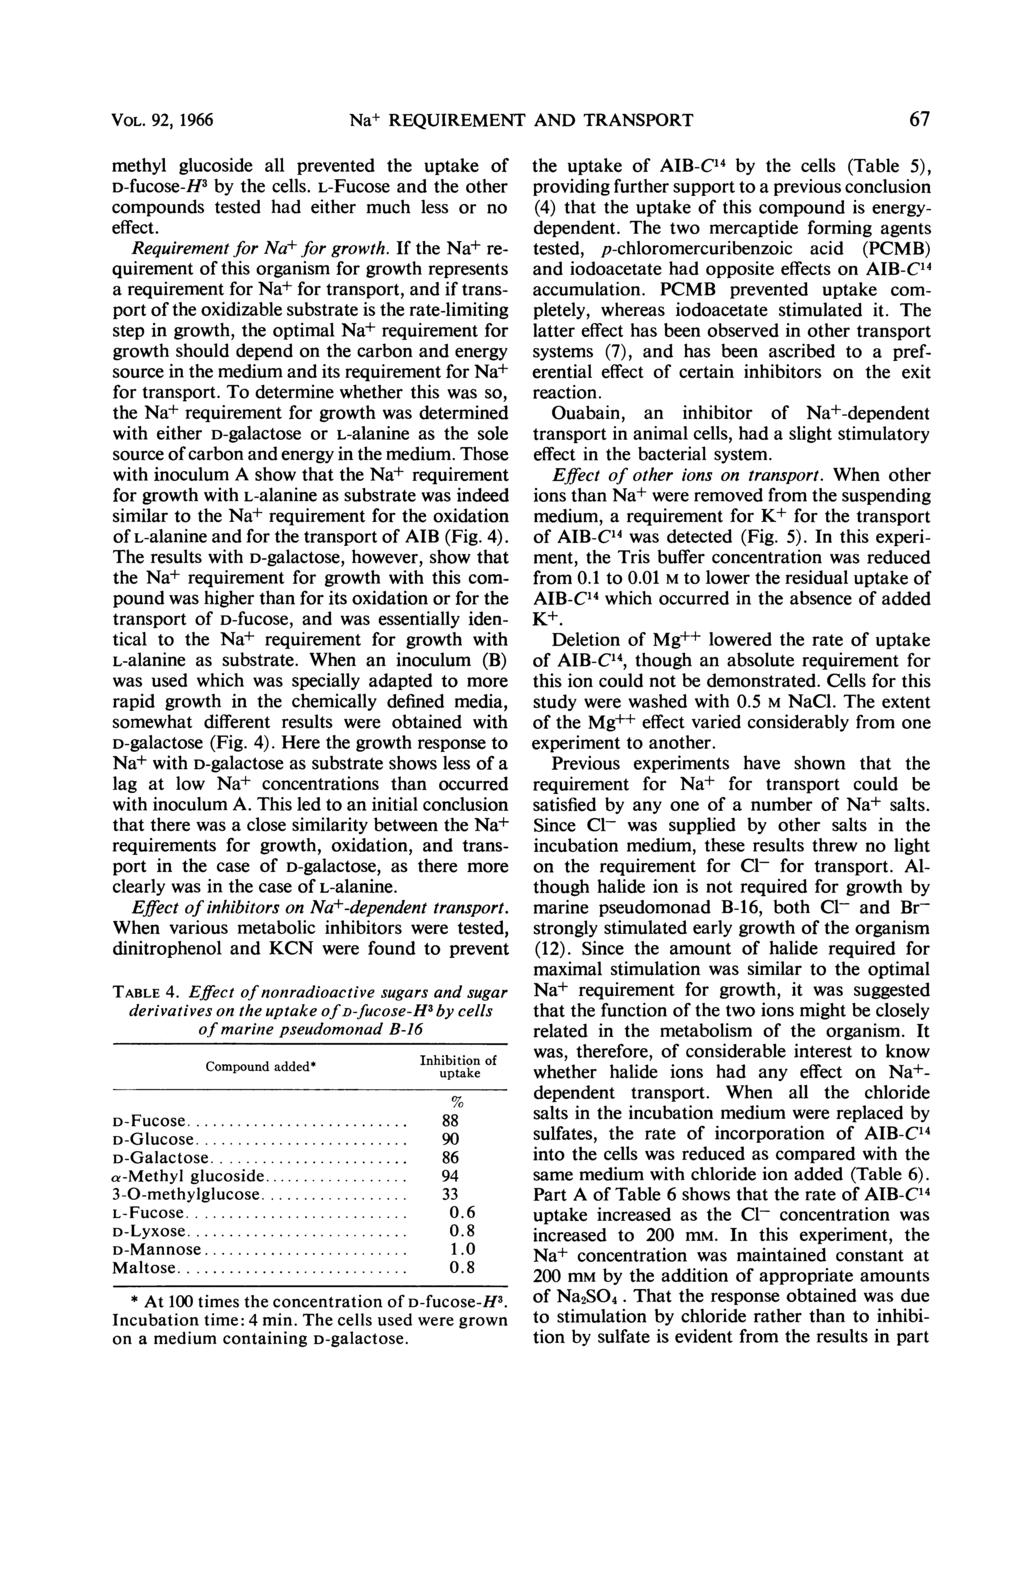 VOL. 92, 1966 Na+ REQUIREMENT AND TRANSPORT 67 methyl glucoside all prevented the uptake of D-fucose-H3 by the cells. L-Fucose and the other compounds tested had either much less or no effect.